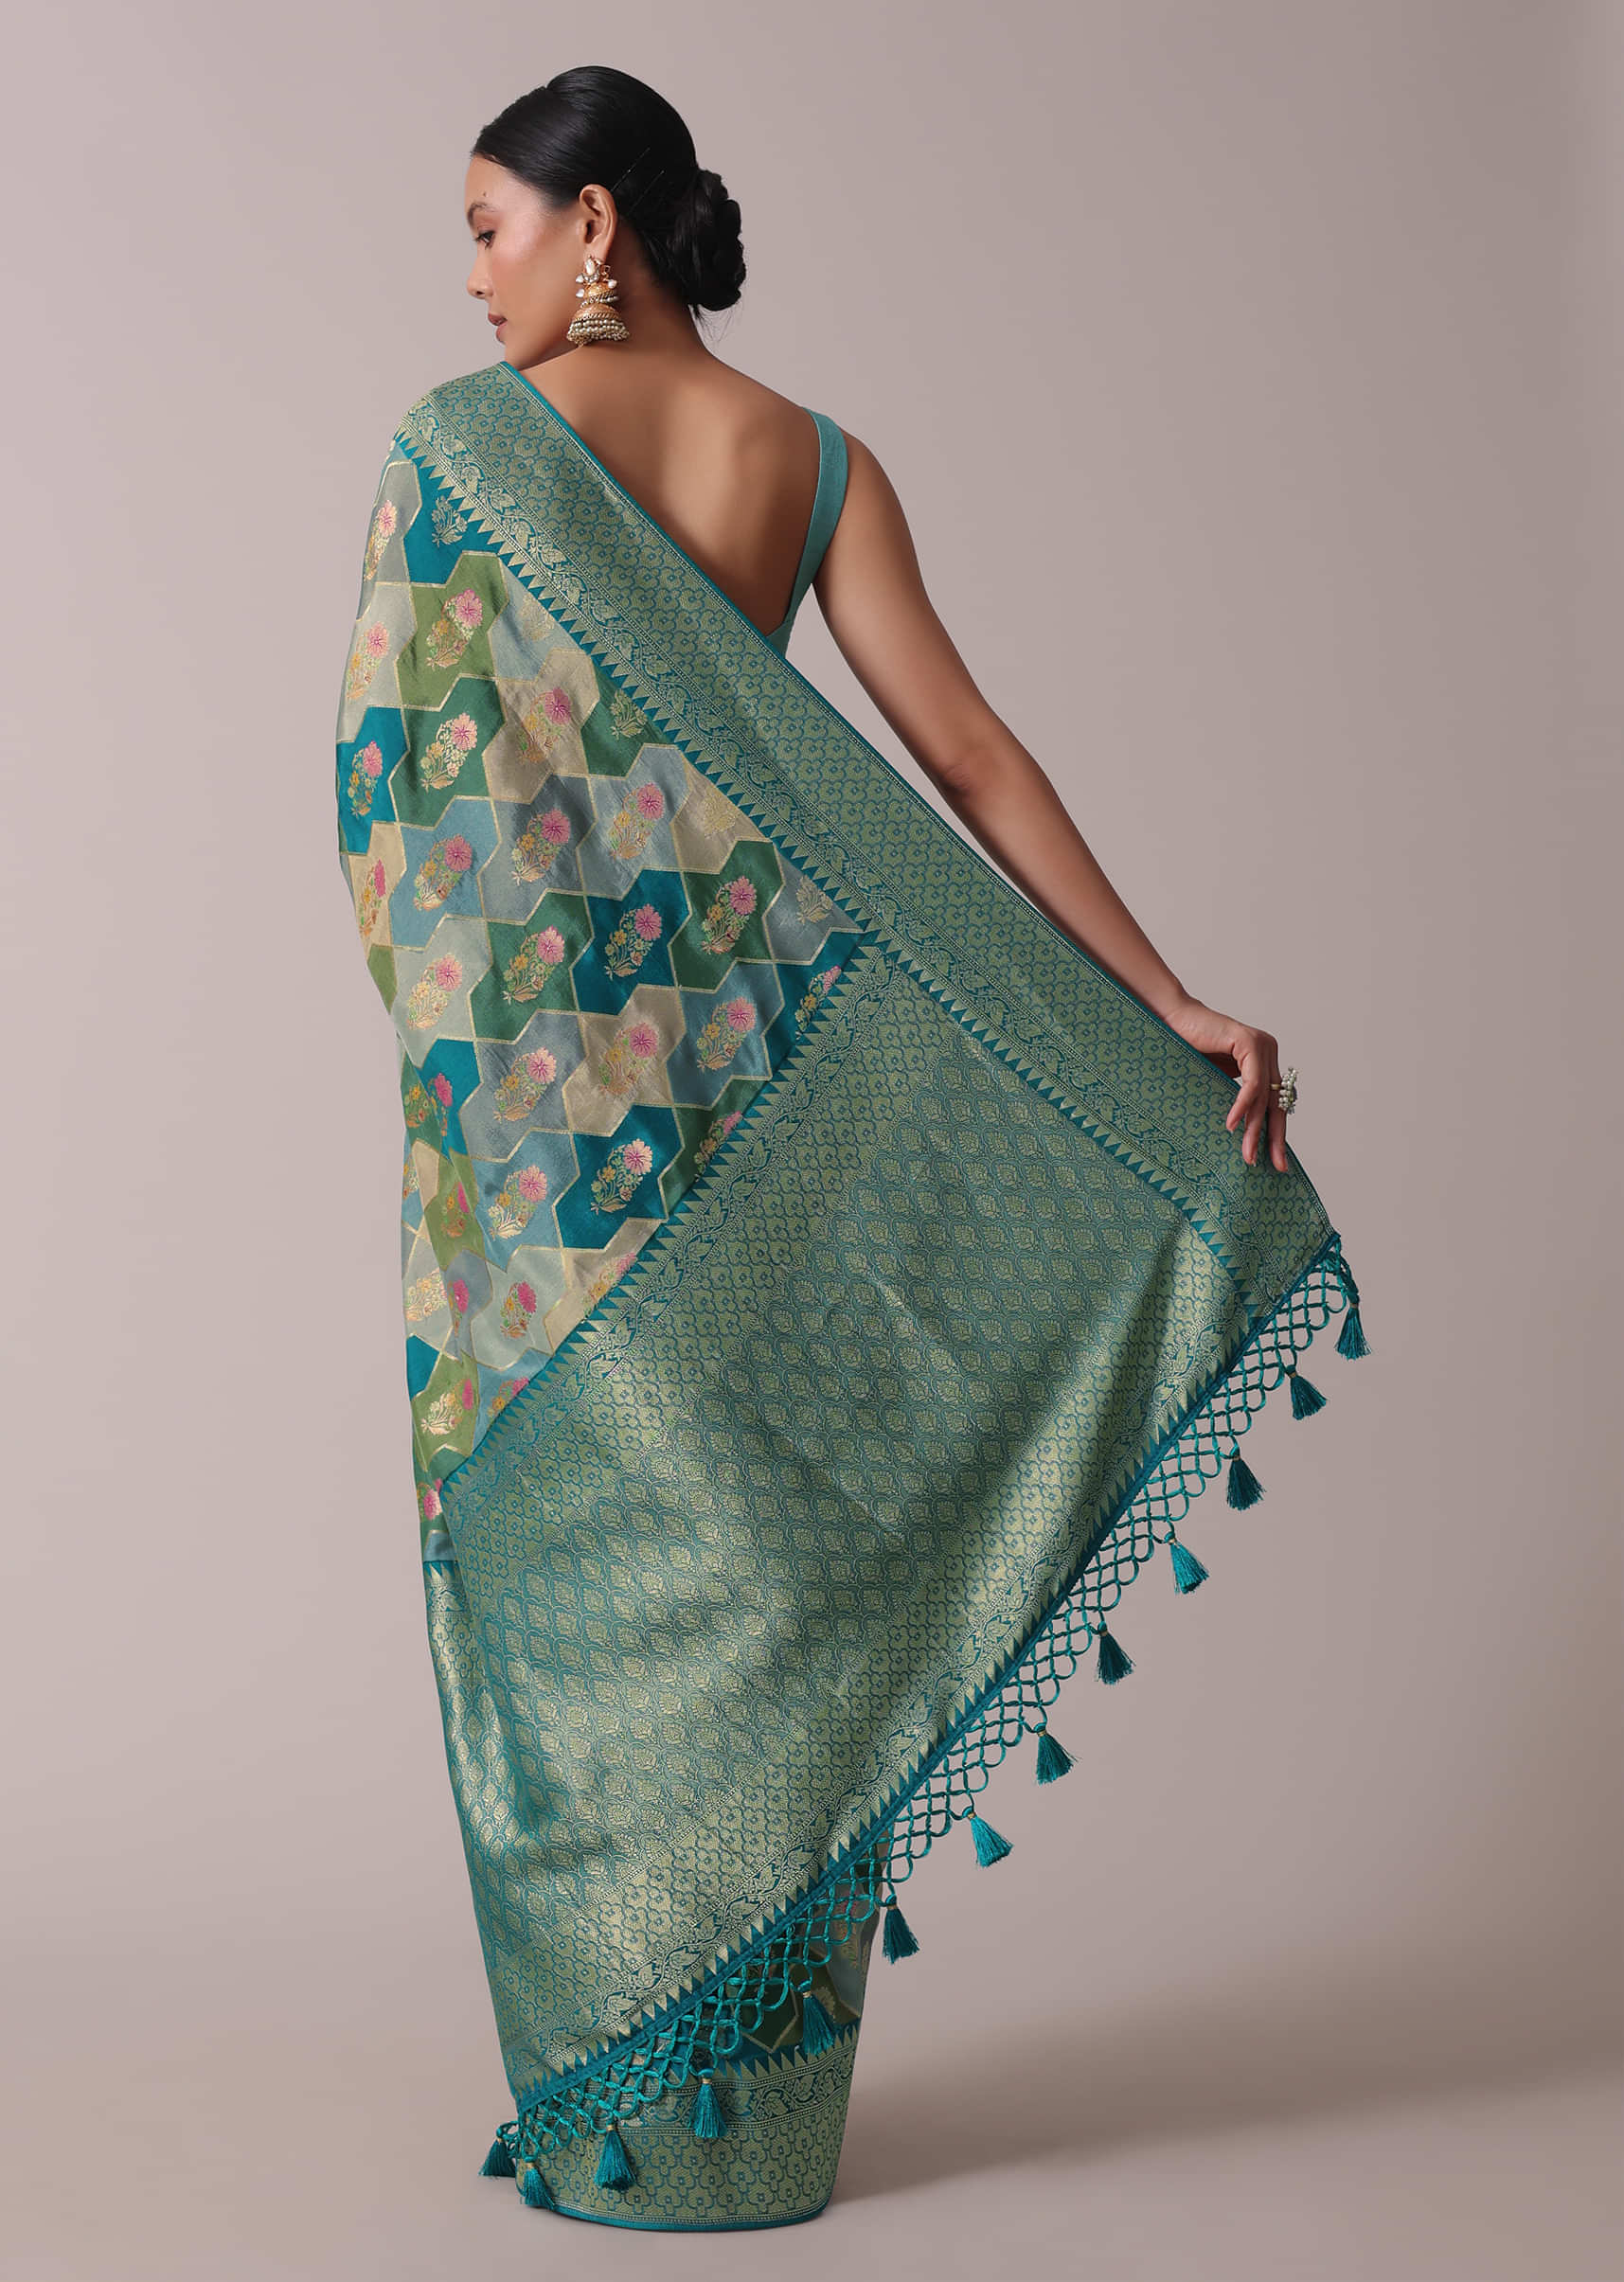 Blue Printed Festive Saree In Dola Silk With Embroidery